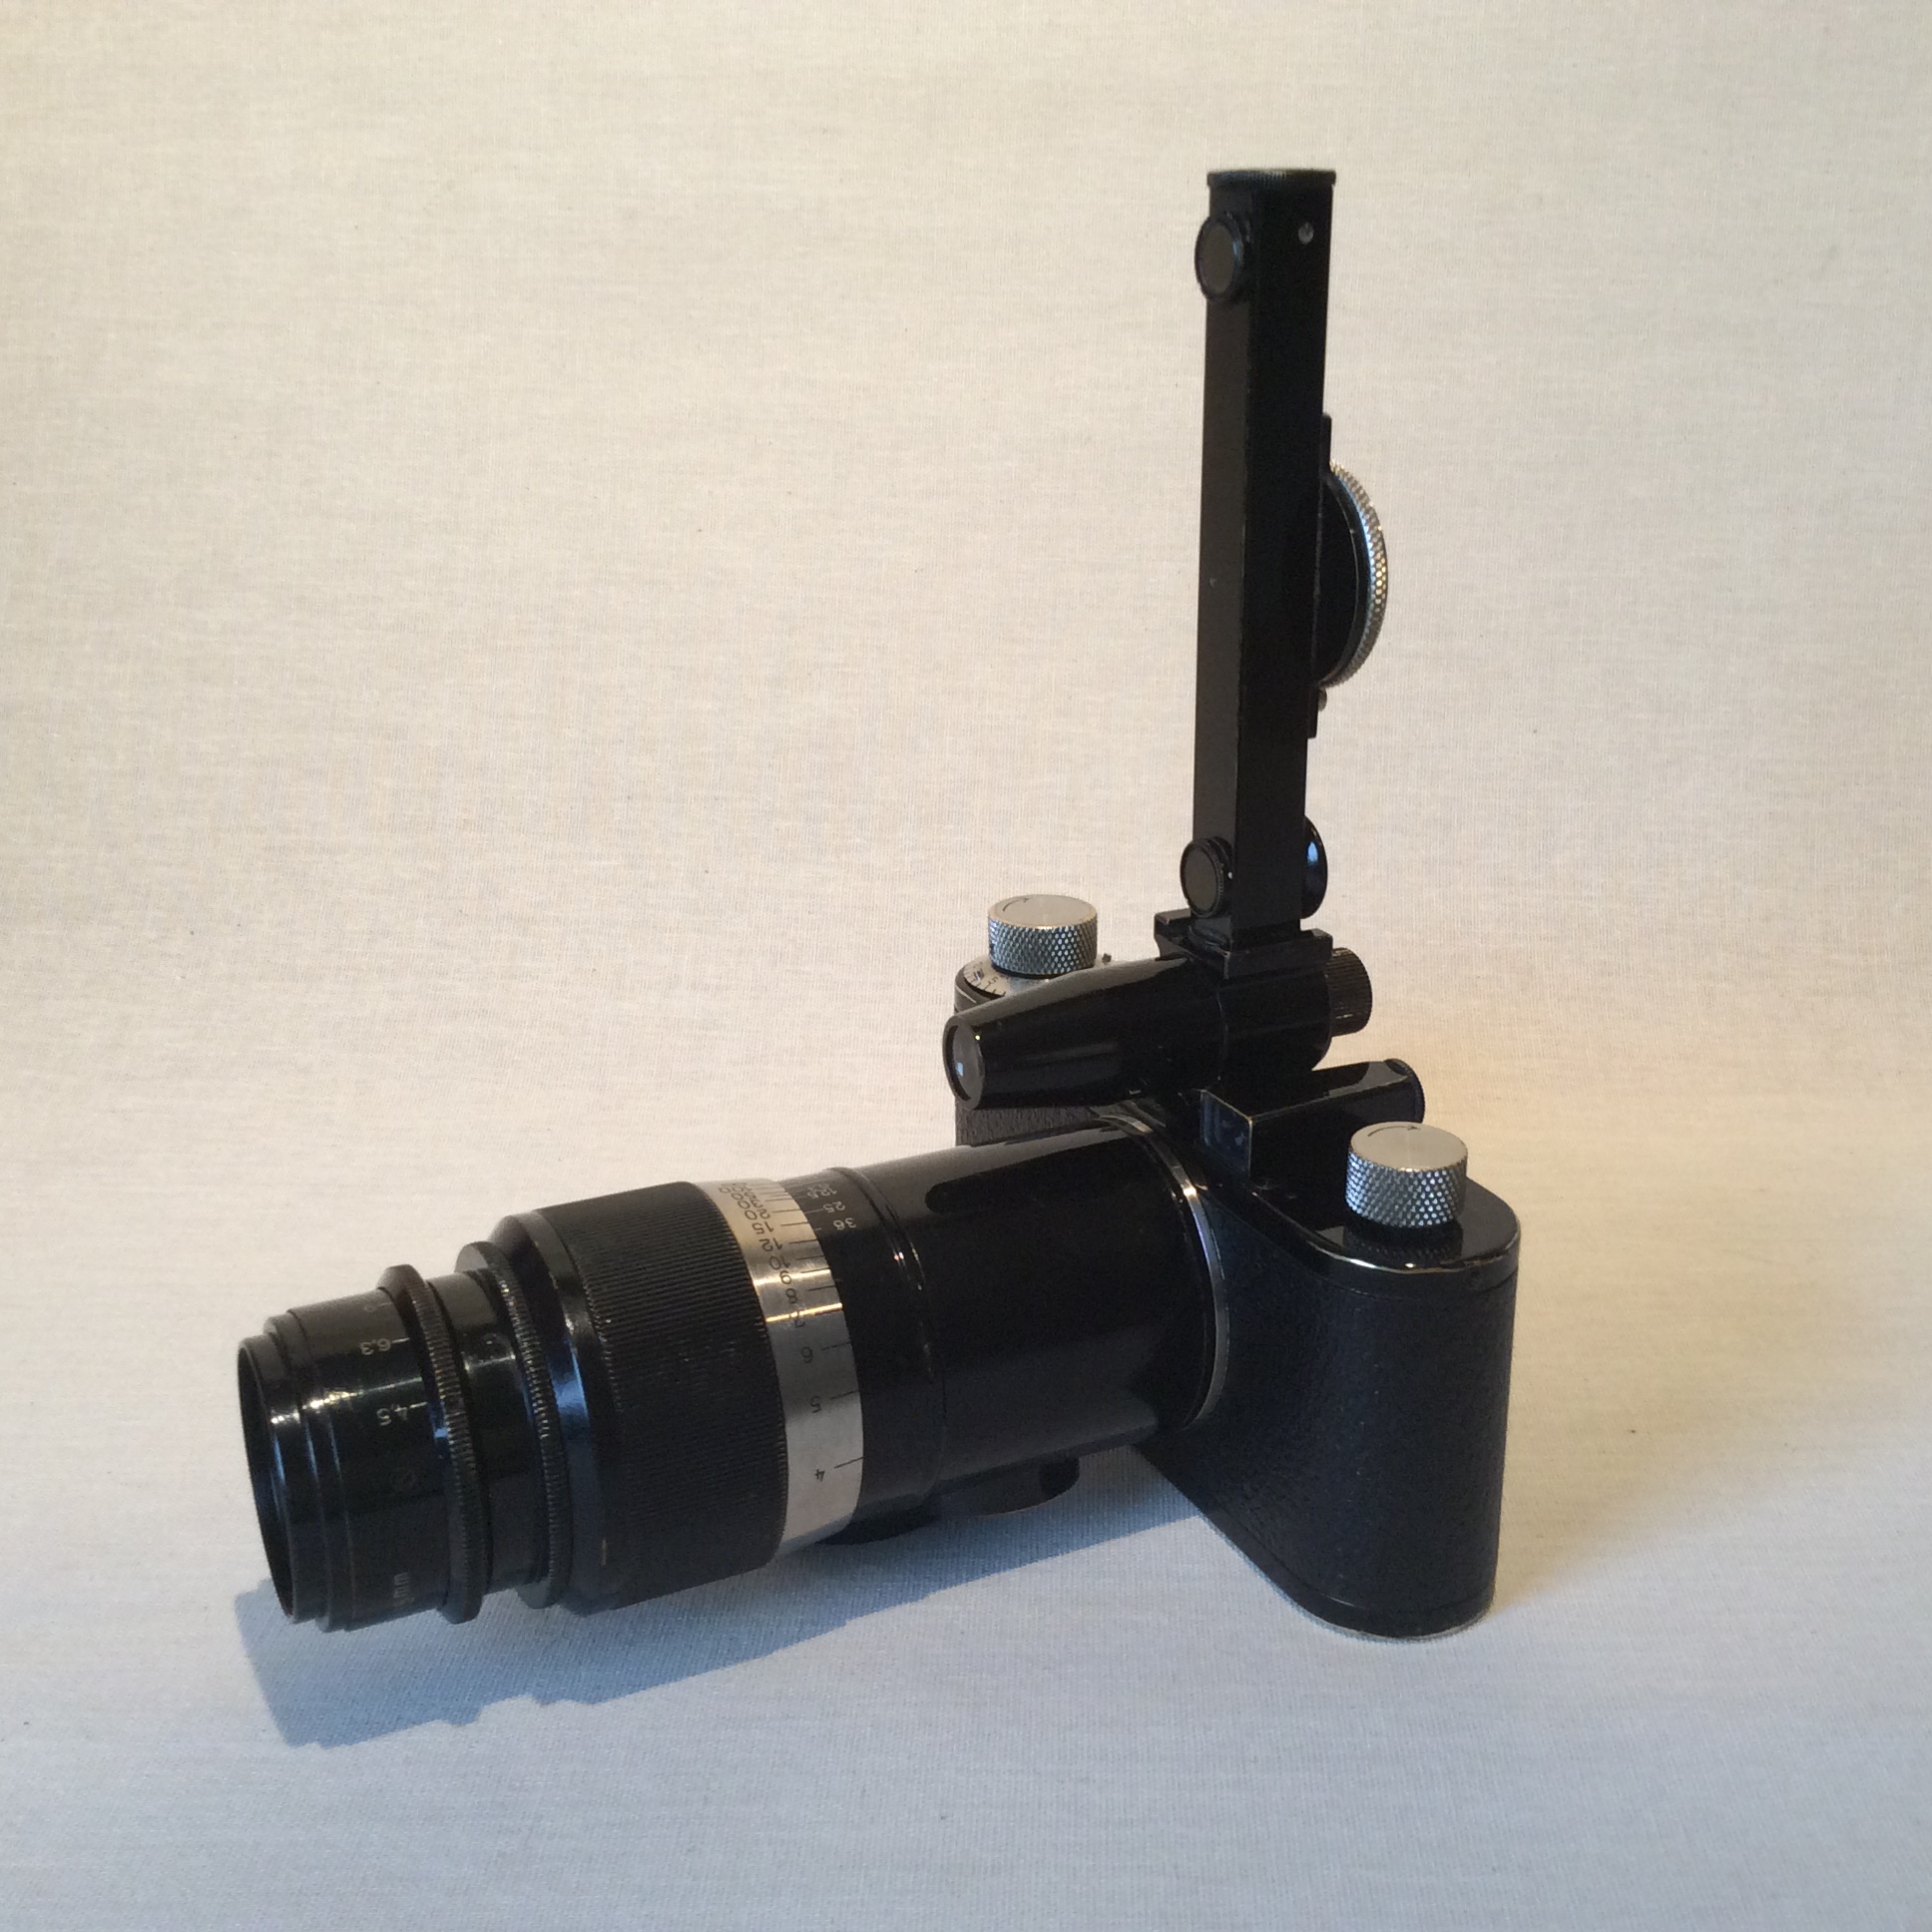 Miniature Masterpieces – Leica VISOR, VIDOM and VIOOH viewfinders